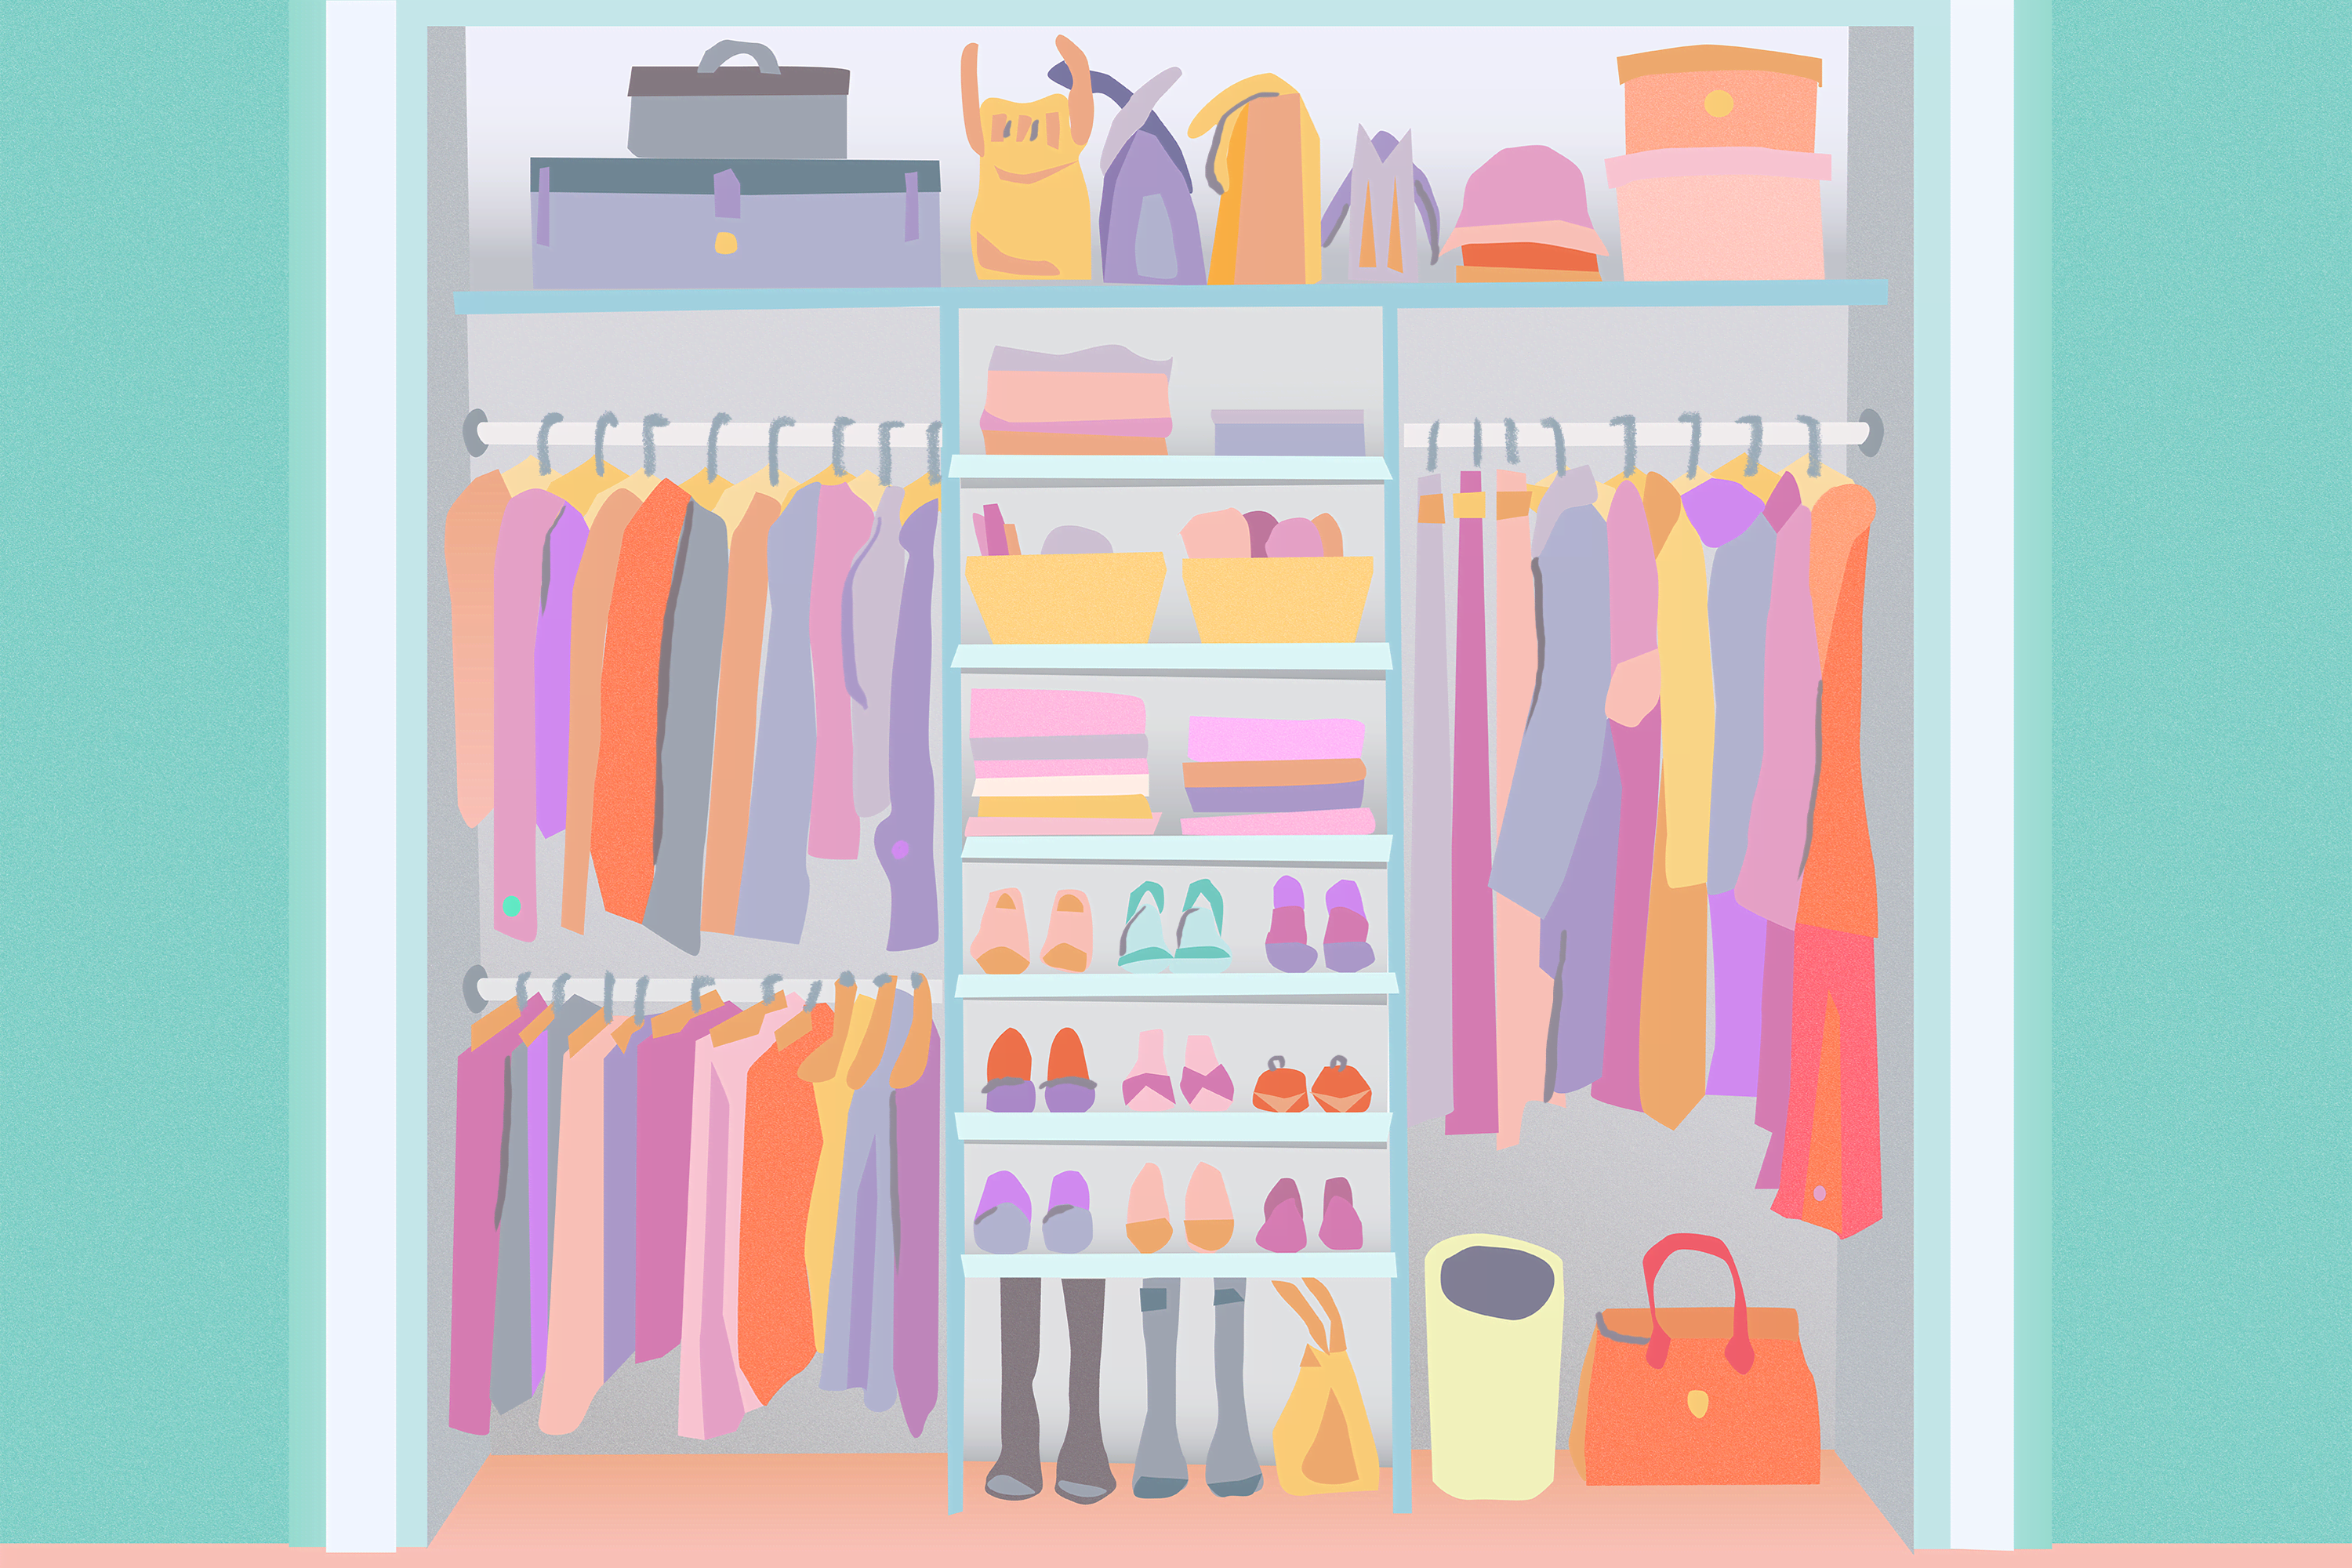 7 small closet storage ideas that live in our heads rent-free